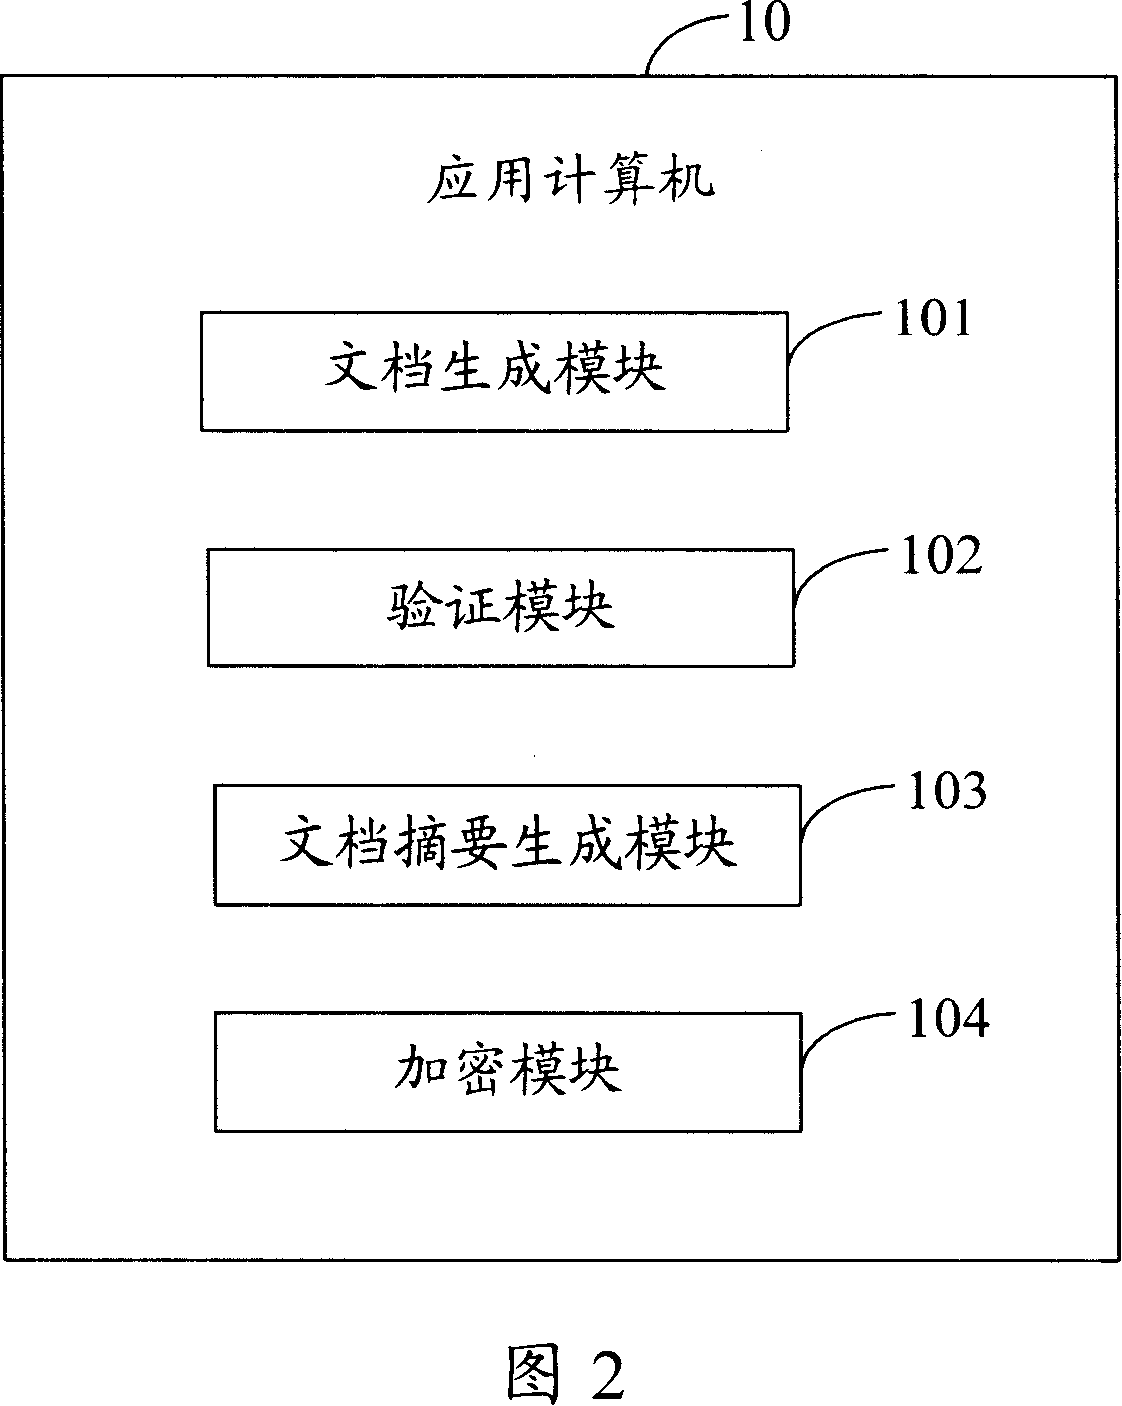 Electronic document automatic signing system and method